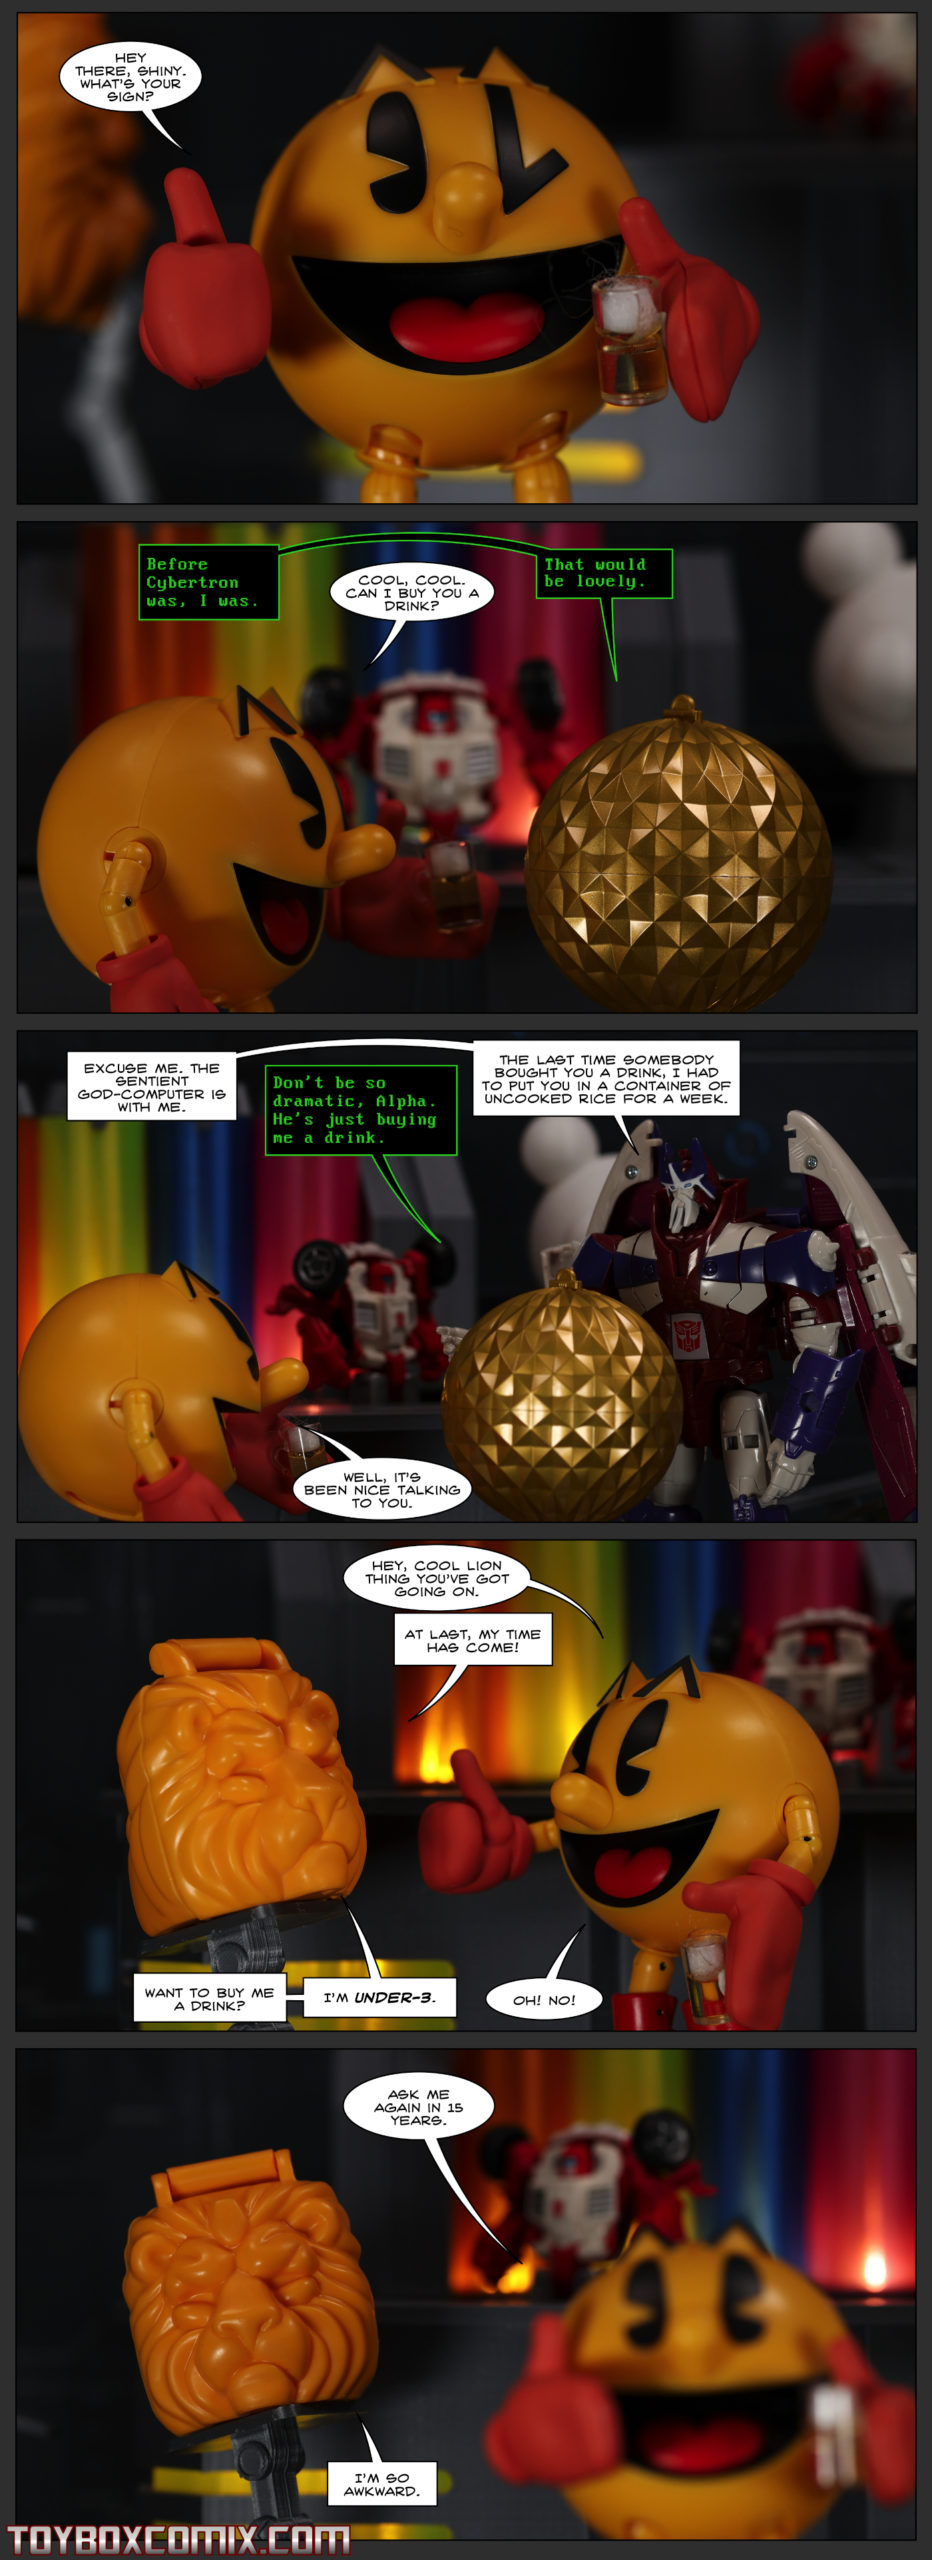 Location: Swerve’s Bar First panel: Pac-Man: “Hey there, Shiny. What’s your sign?” Second panel: Vector Sigma: “Before Cybertron was, I was.” Pac-Man: “Cool, cool. Can I buy you a drink?” Vector Sigma: “That would be lovely.” Third panel: Alpha Trion: “Excuse me. The sentient god-computer is with me.” Vector Sigma: “Don’t be so dramatic, Alpha. He’s just buying me a drink.” Alpha Trion: “The last time somebody bought you a drink, I had to put you in a container of uncooked rice for a week.” Pac-Man: “Well, it’s been nice talking to you.” Fourth panel: Pac-Man: “Hey, cool lion thing you’ve got going on.” Under-3, in lion-head mode: “At last, my time has come! Want to buy me a drink? I’m Under-3.” Pac-Man: “Oh! No!” Fifth panel: Pac-Man, walking away: “Ask me again in 15 years.” Under-3: “I’m so awkward.”